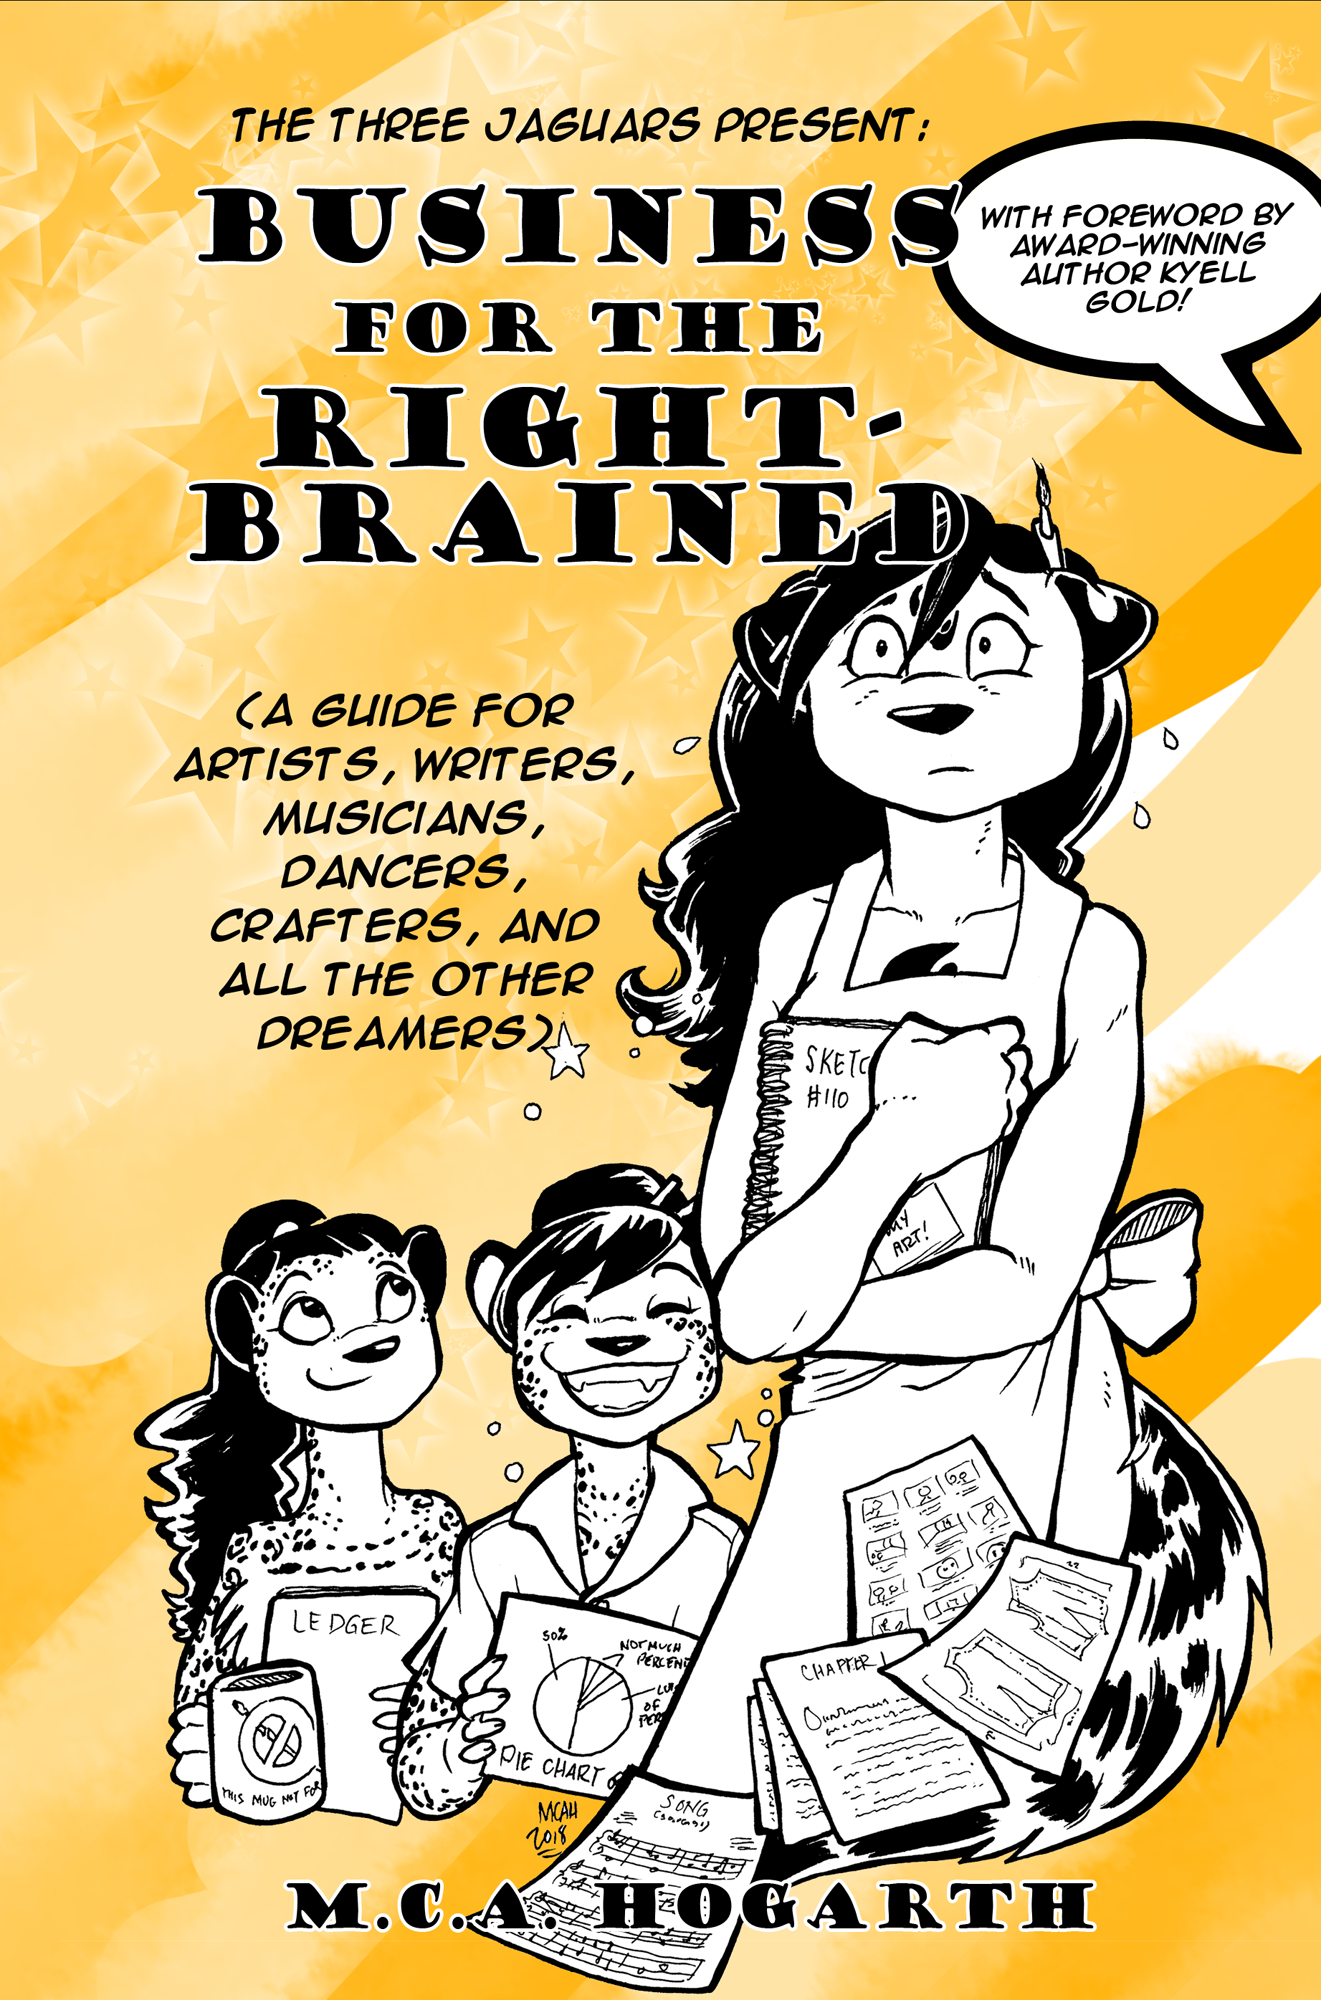 Business for the Right-Brained: A Guide for Artists, Writers, Musicians, Dancers, Crafters, and All the Other Dreamers